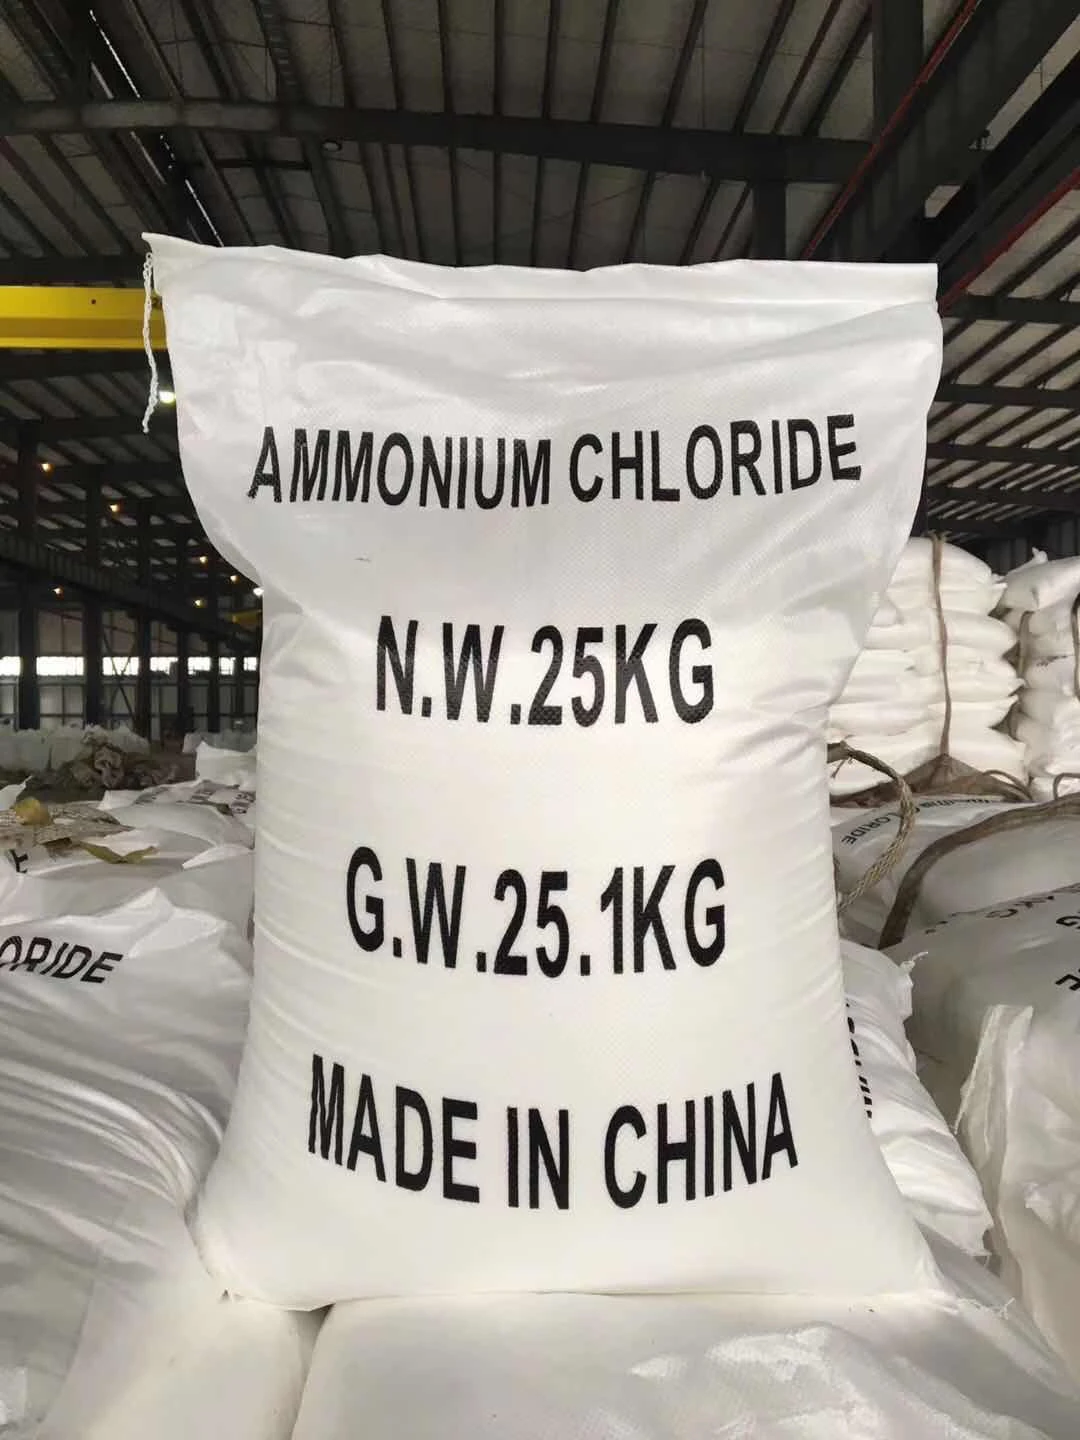 Ammonium chloride as curing agent used in density board